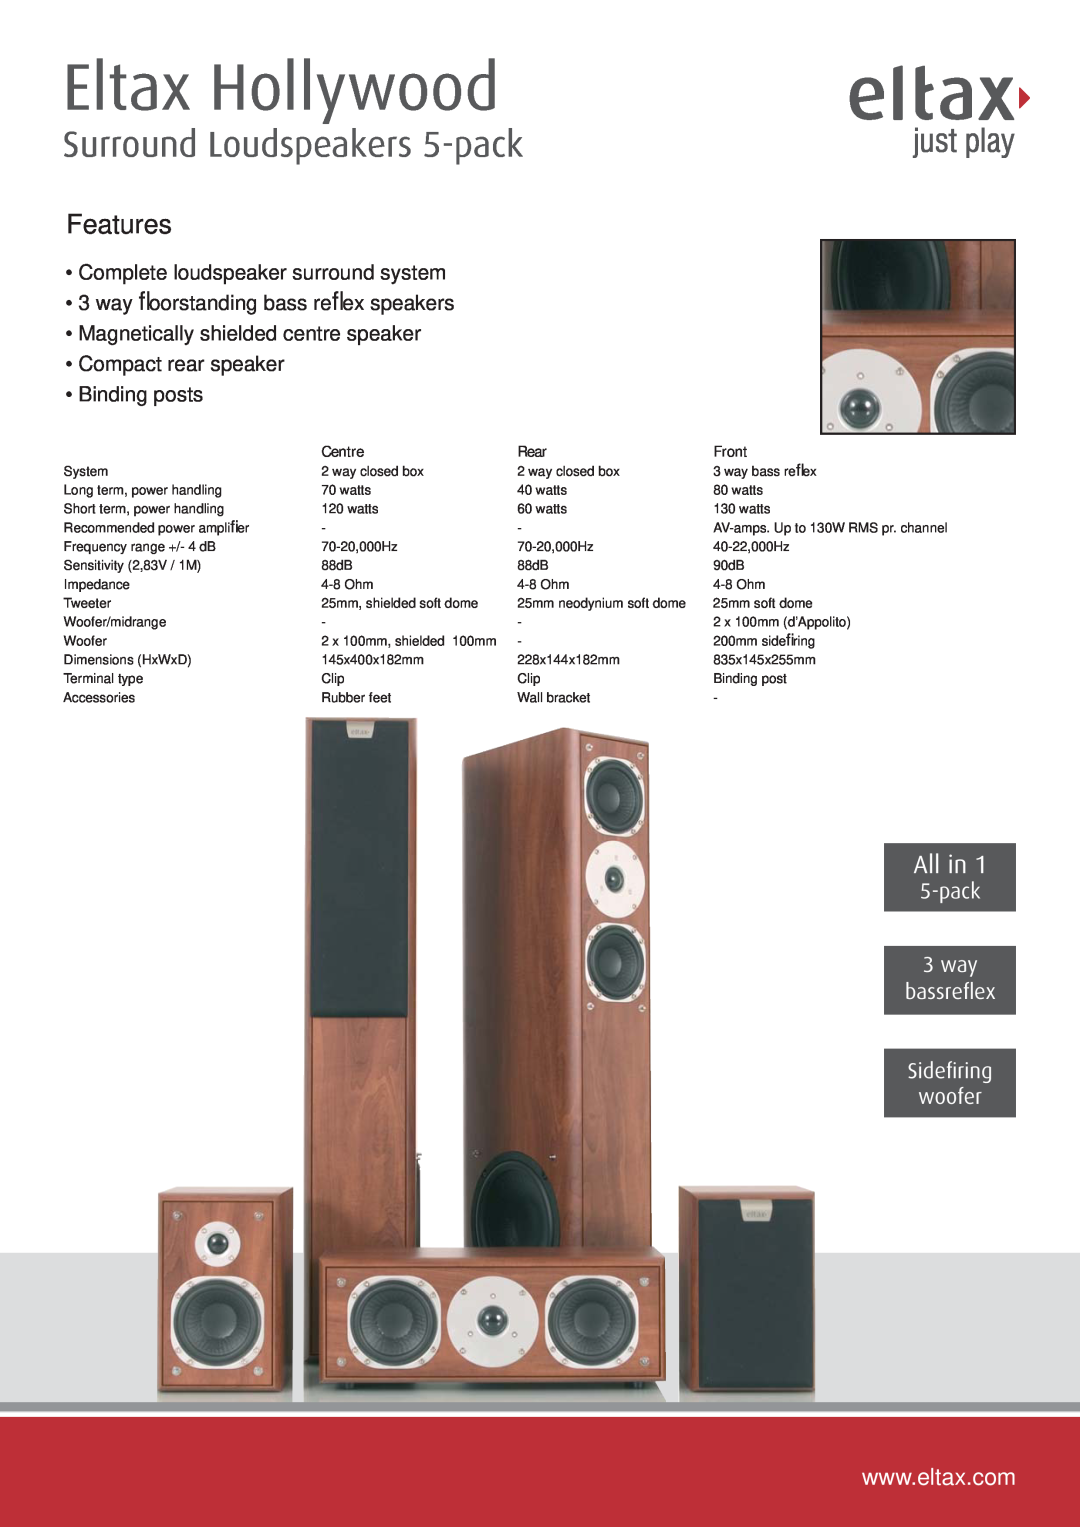 Eltax dimensions Eltax Hollywood, Surround Loudspeakers 5-pack, Features, Complete loudspeaker surround system, All in 